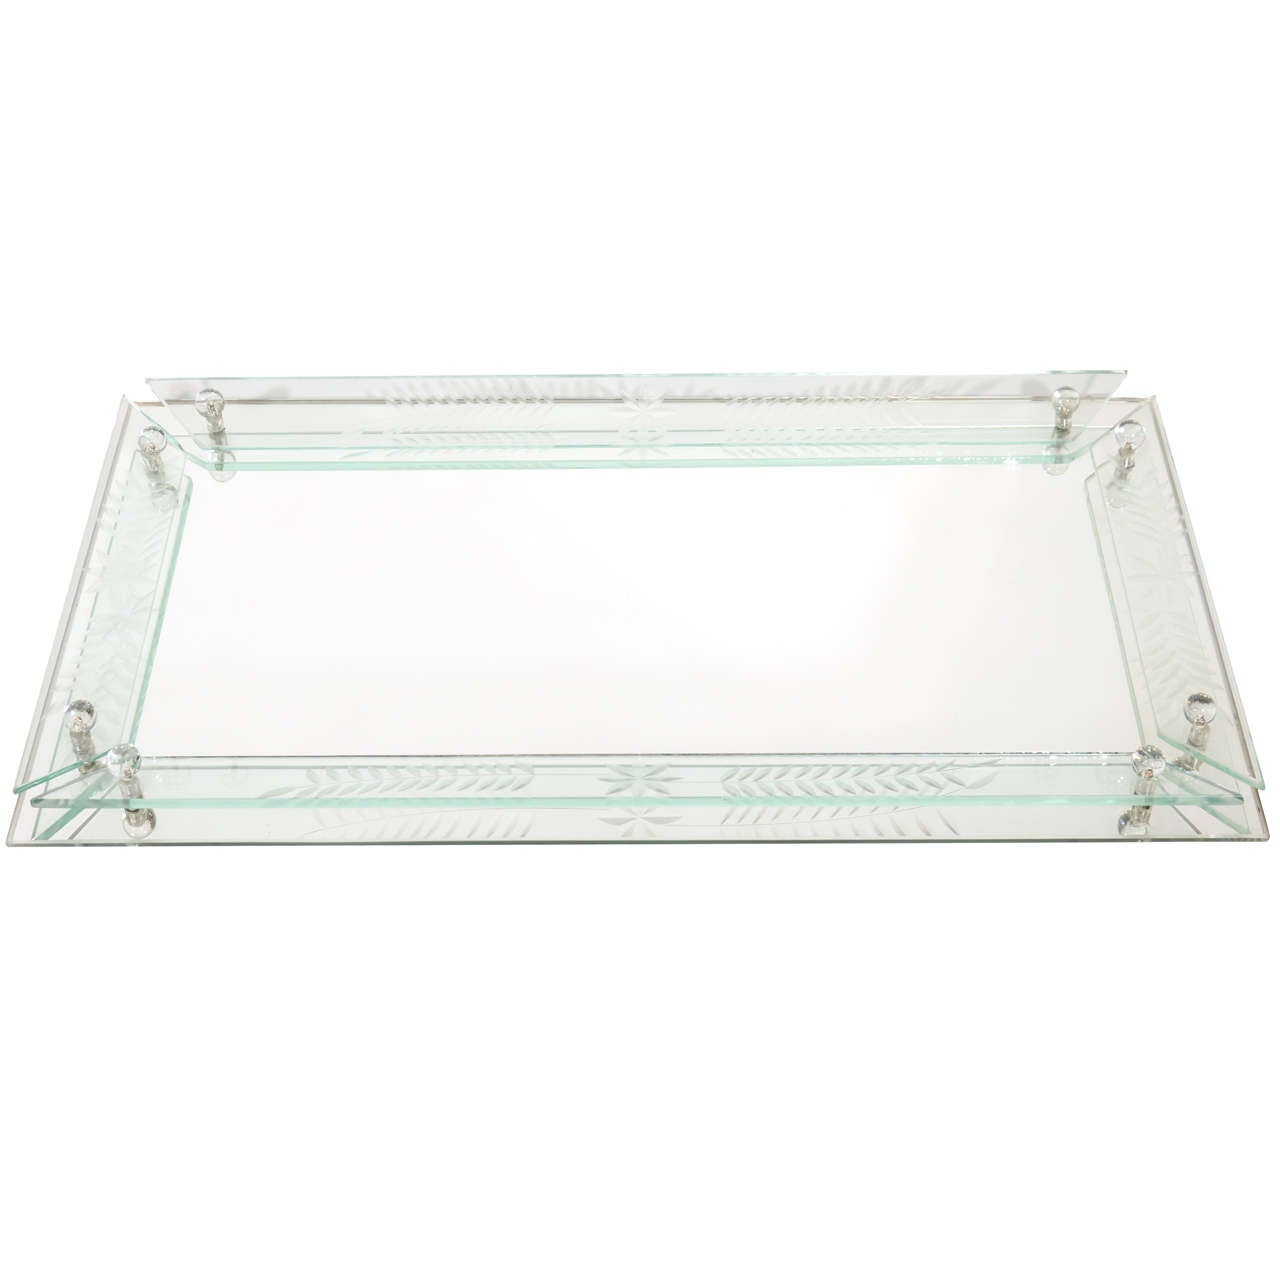 Art Deco Mirrored and Etched Glass Large Vanity Tray